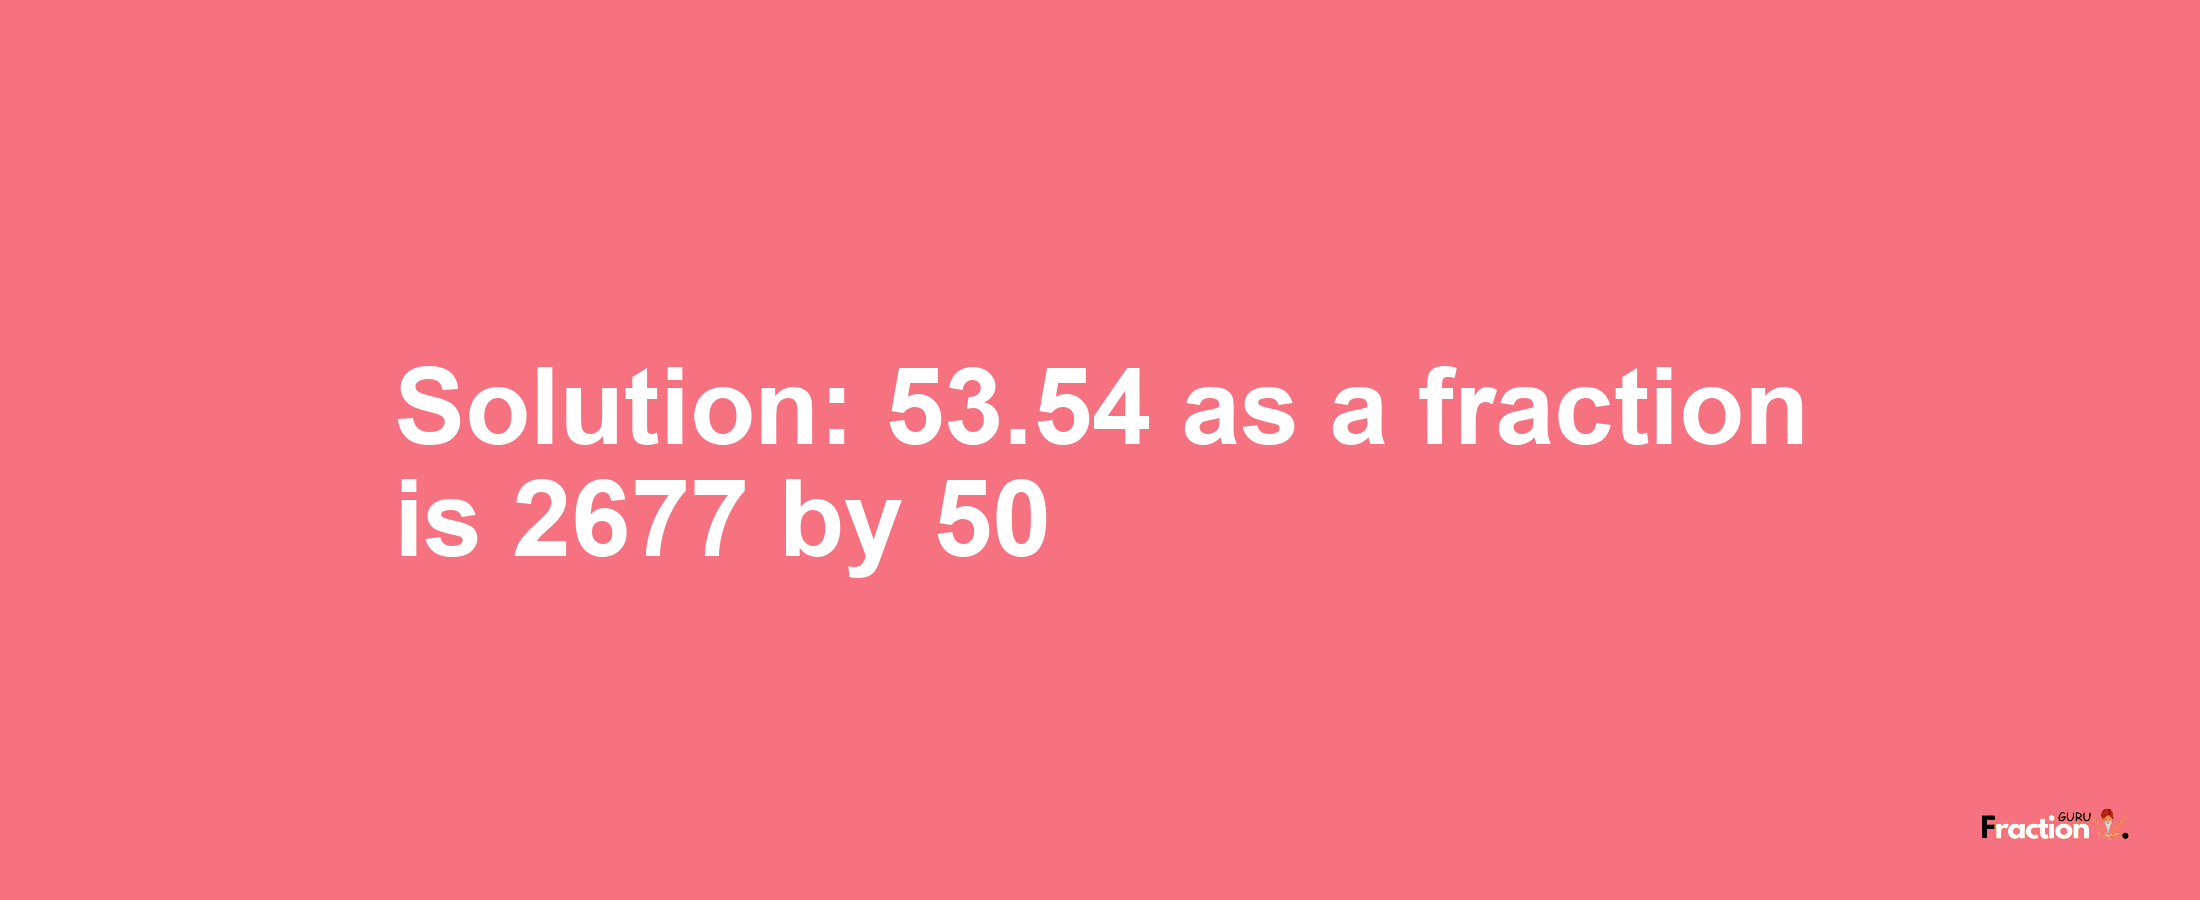 Solution:53.54 as a fraction is 2677/50